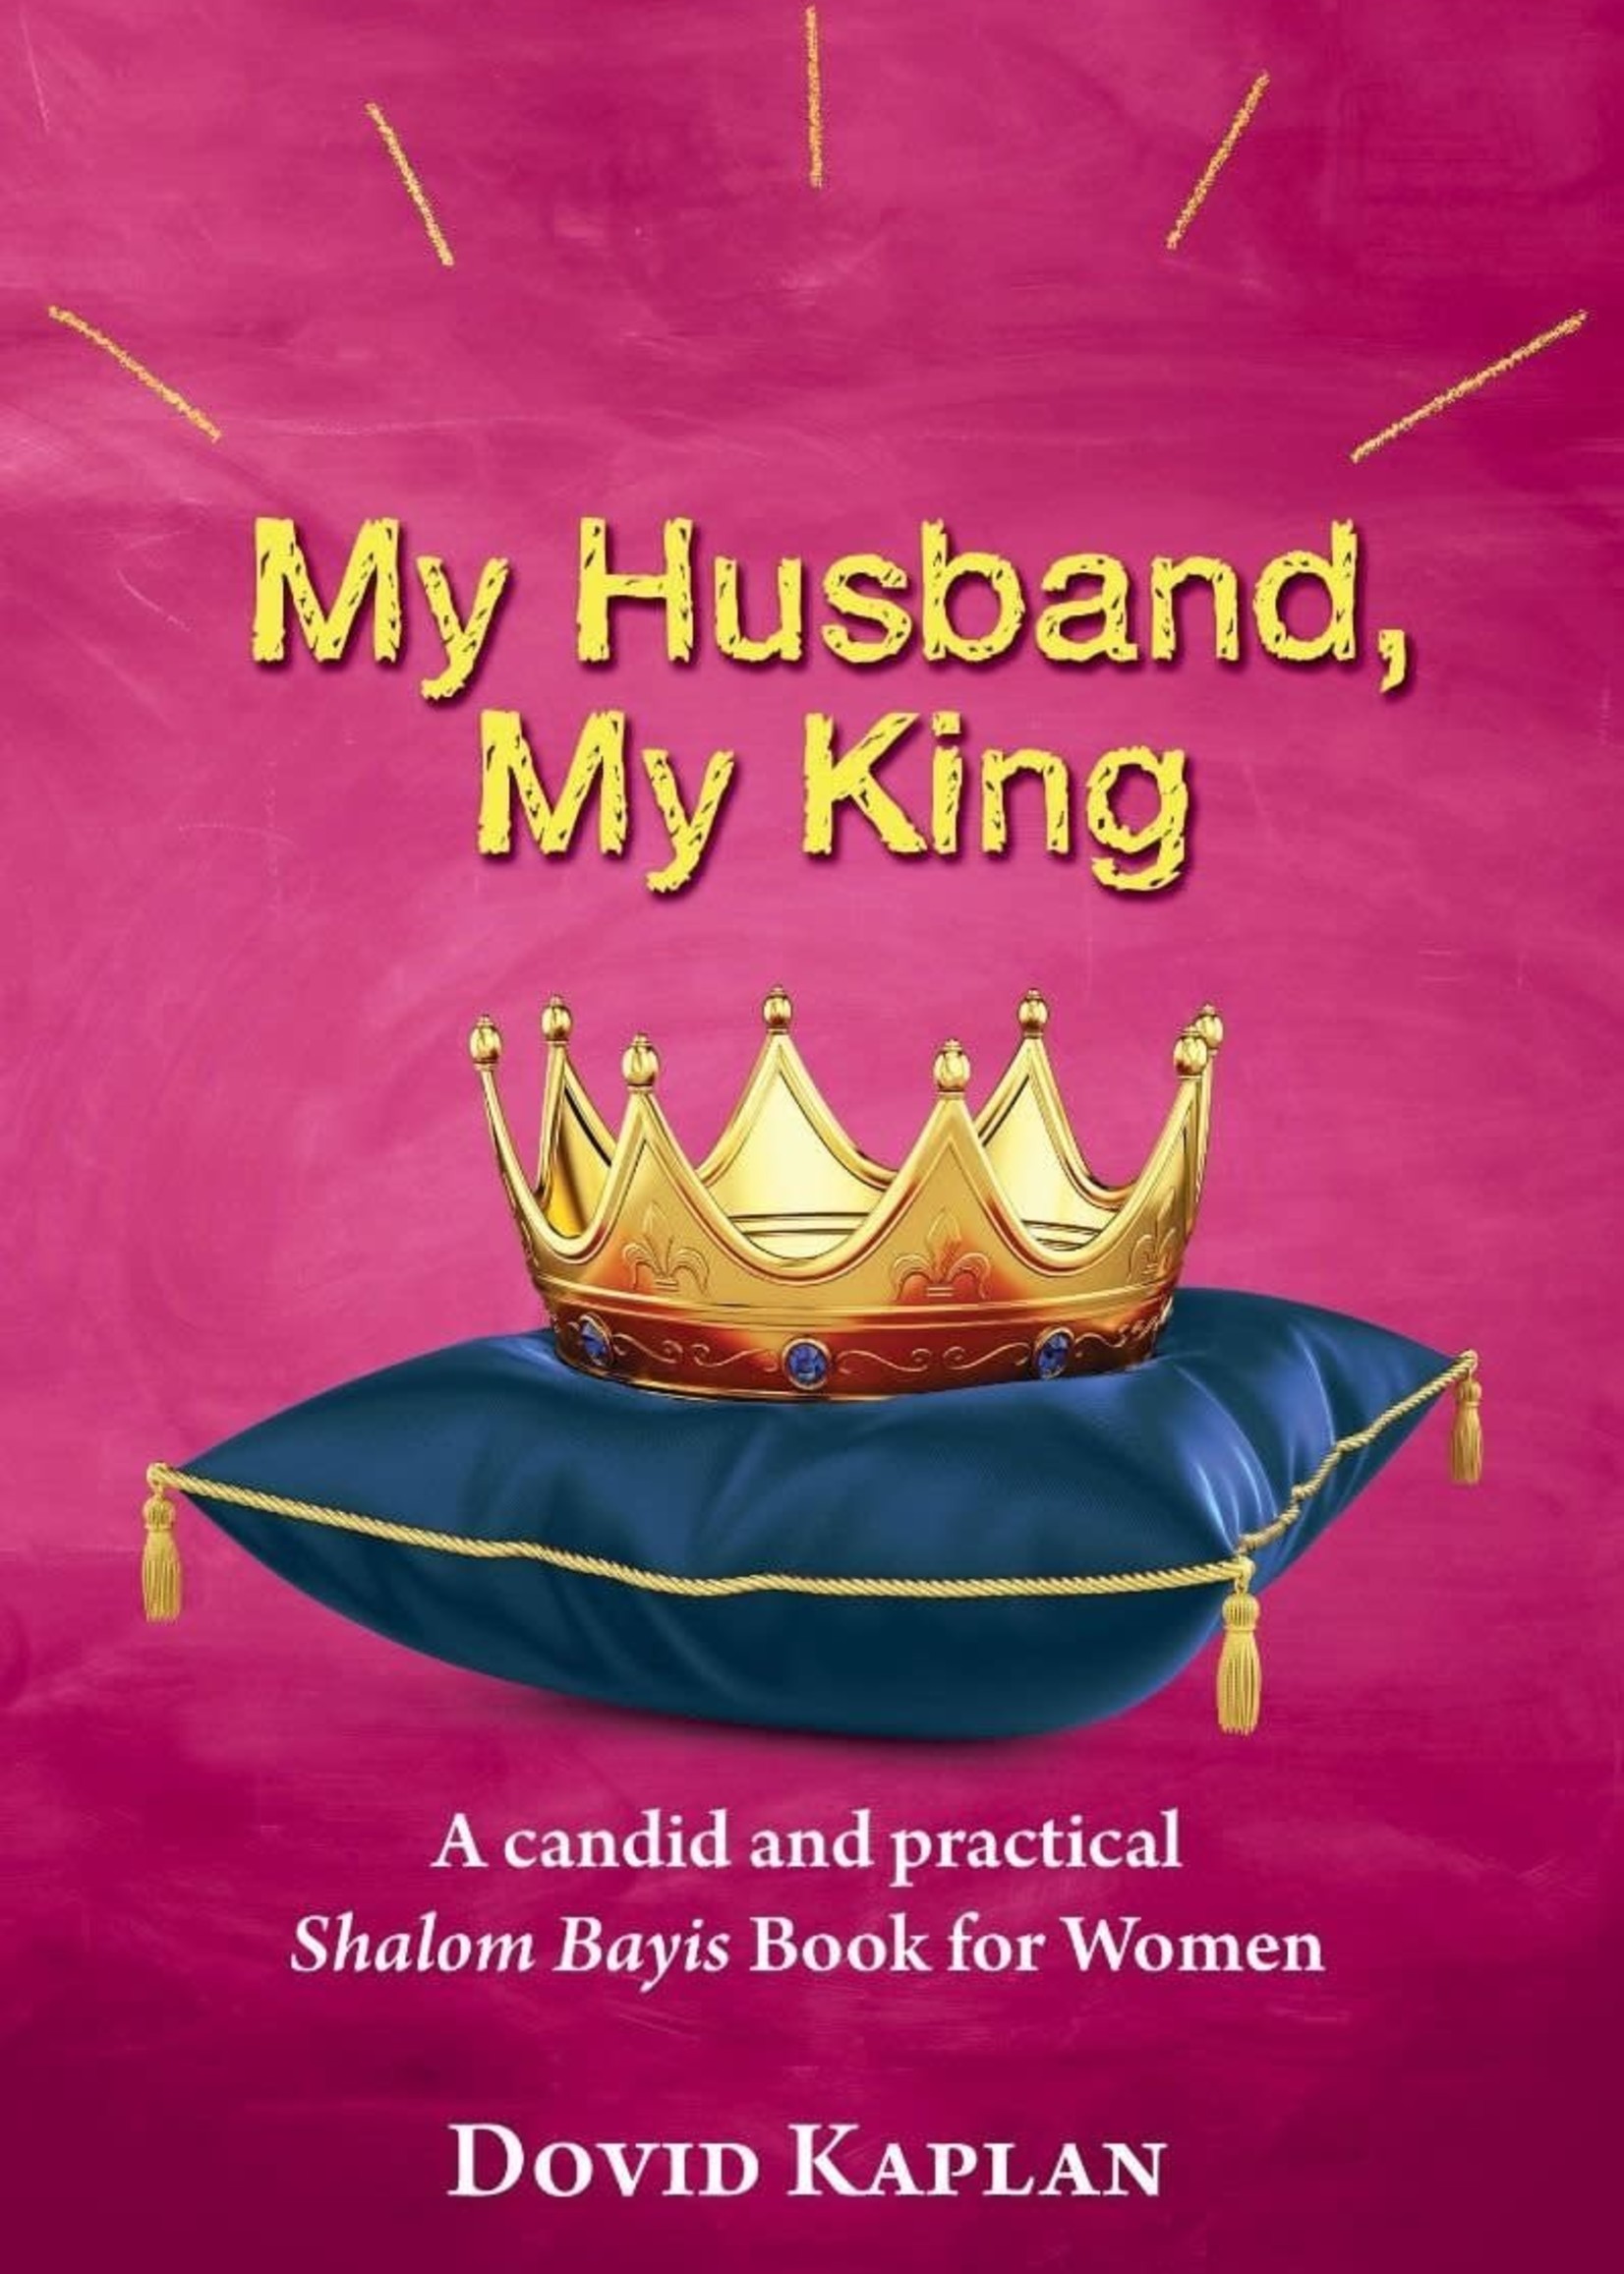 My Husband/ My King - A Candid And Practical Shalom Bayis Book For Women